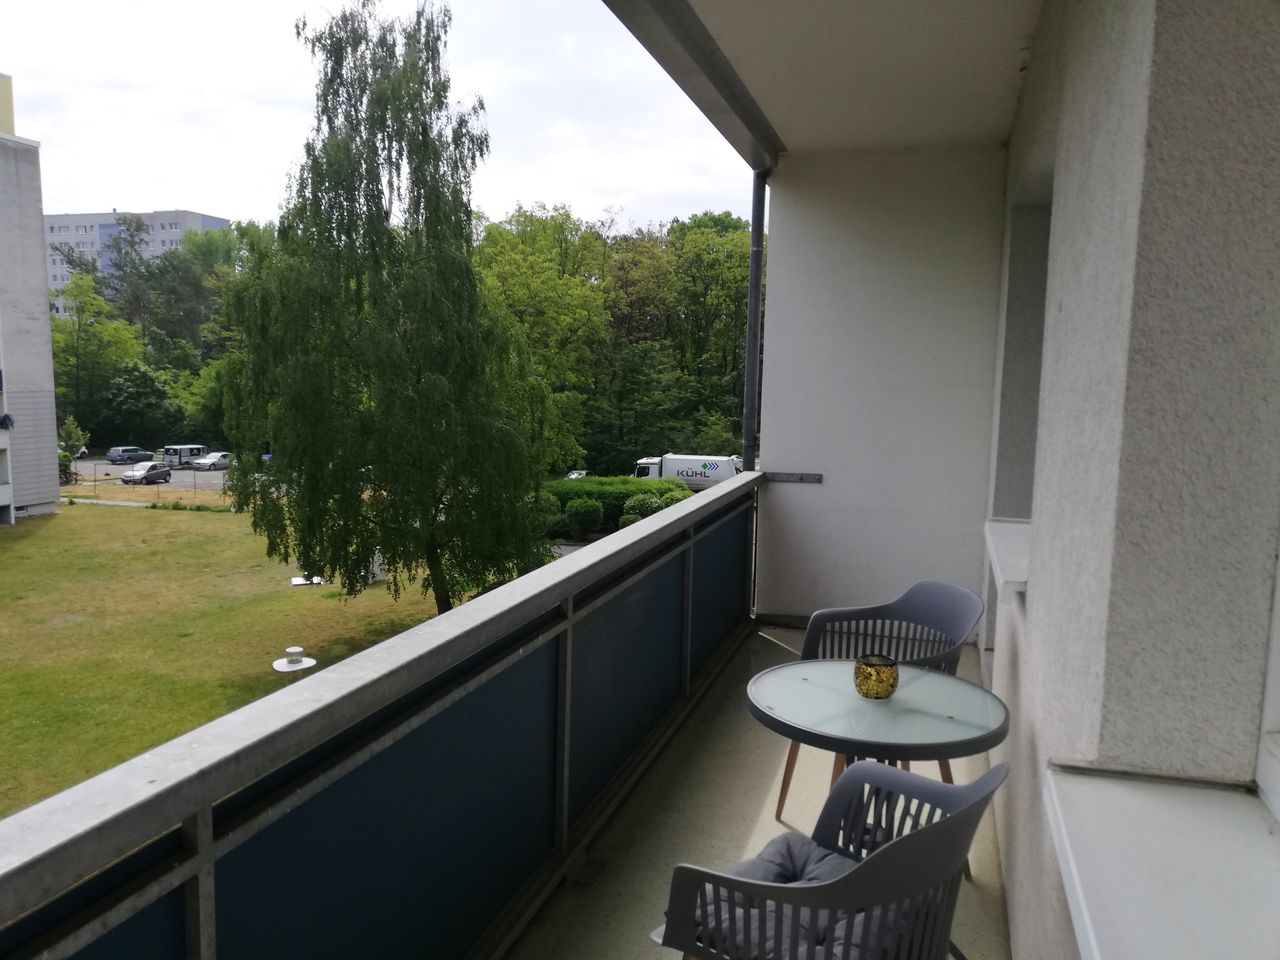 Fully furnished 1.5 room apartment right next to the Köpenick clinic